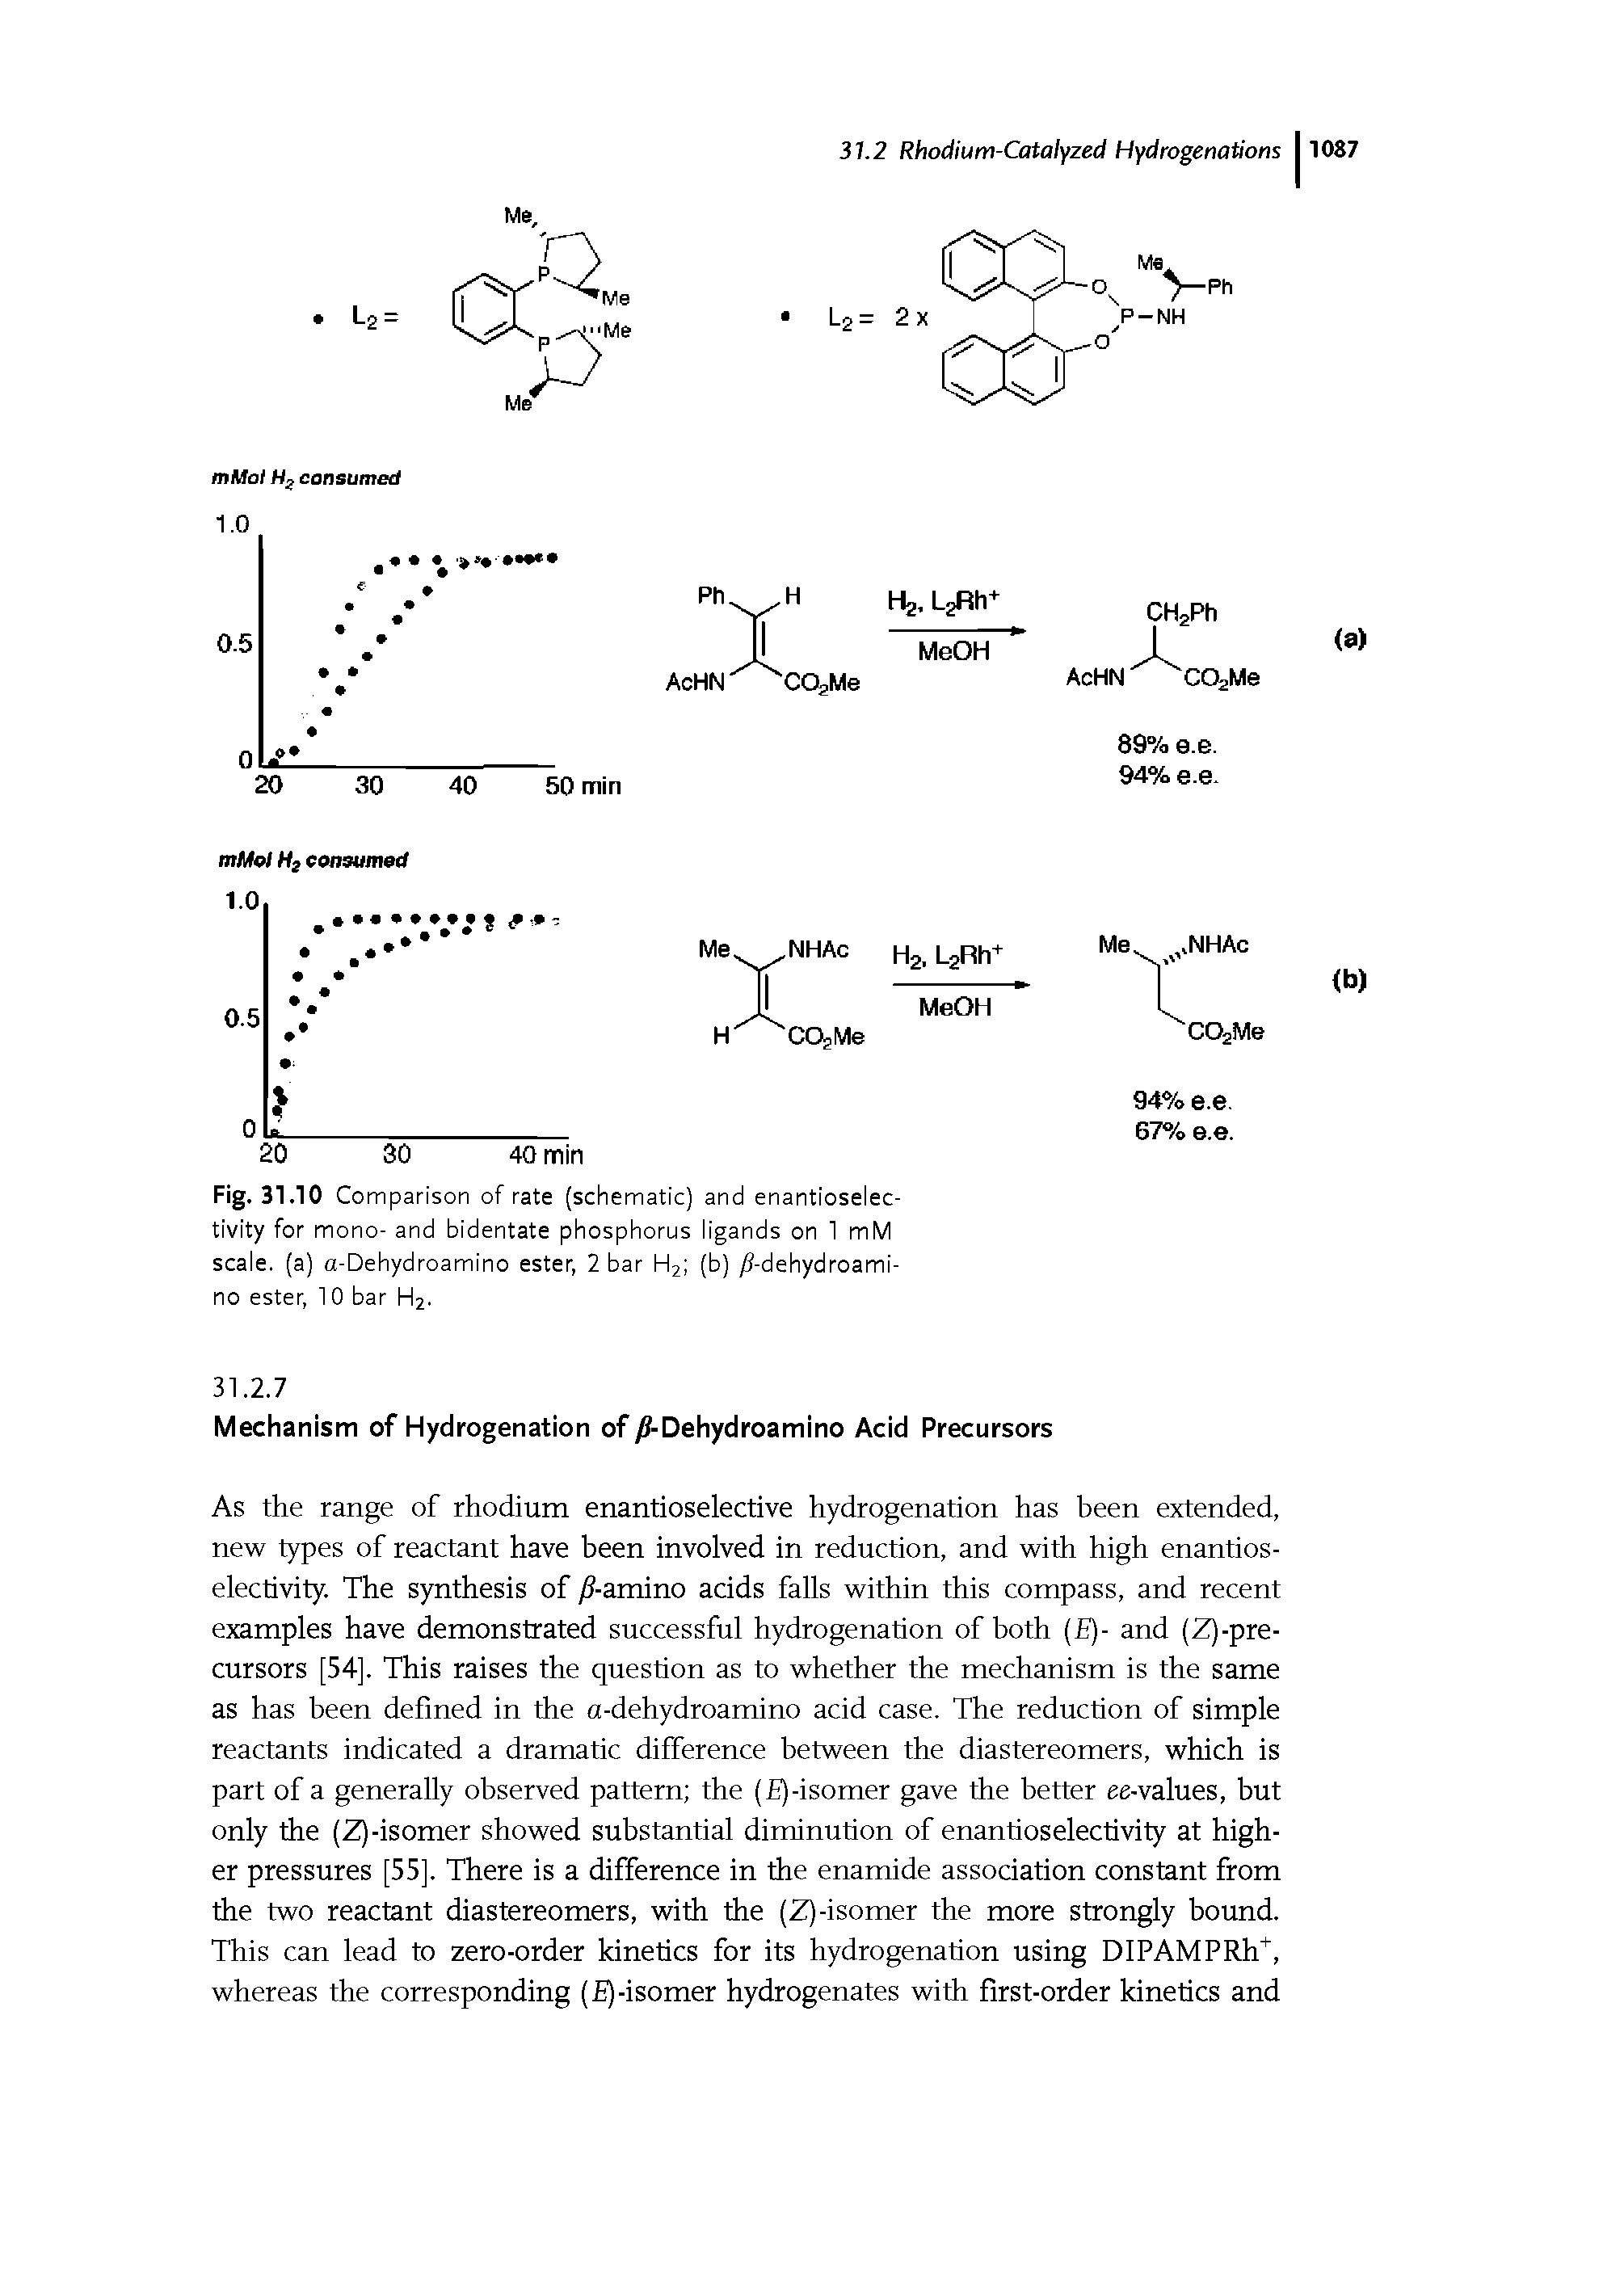 Fig. 31.10 Comparison of rate (schematic) and enantioselec-tivity for mono- and bidentate phosphorus ligands on 1 mM scale, (a) a-Dehydroamino ester, 2 bar H2 (b) jS-dehydroami-no ester, 10 bar H2.